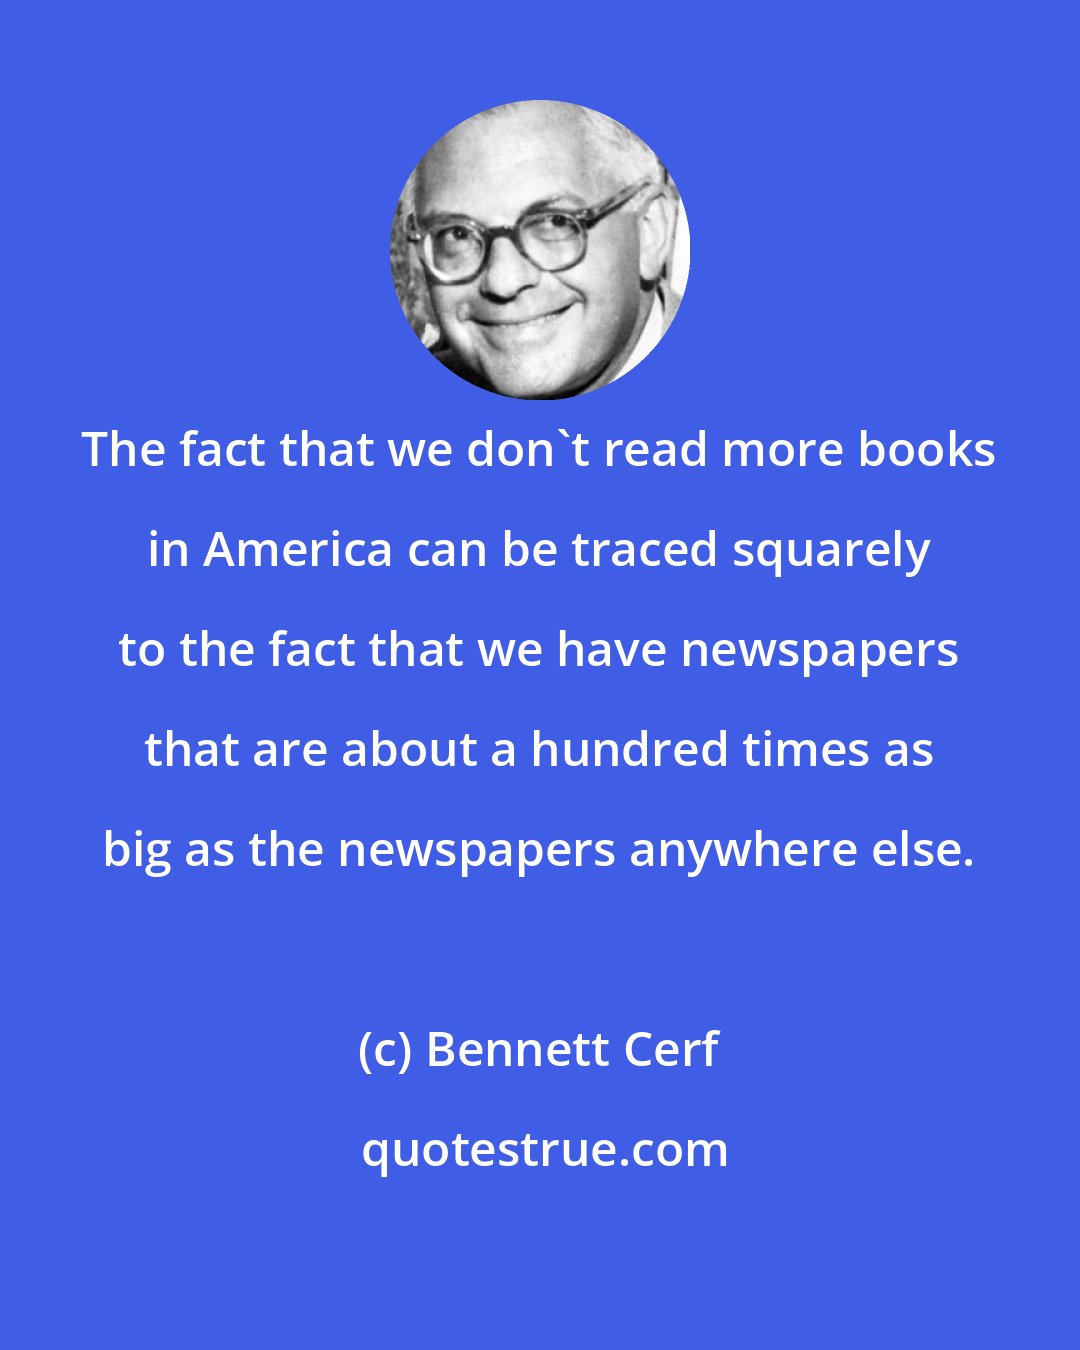 Bennett Cerf: The fact that we don't read more books in America can be traced squarely to the fact that we have newspapers that are about a hundred times as big as the newspapers anywhere else.